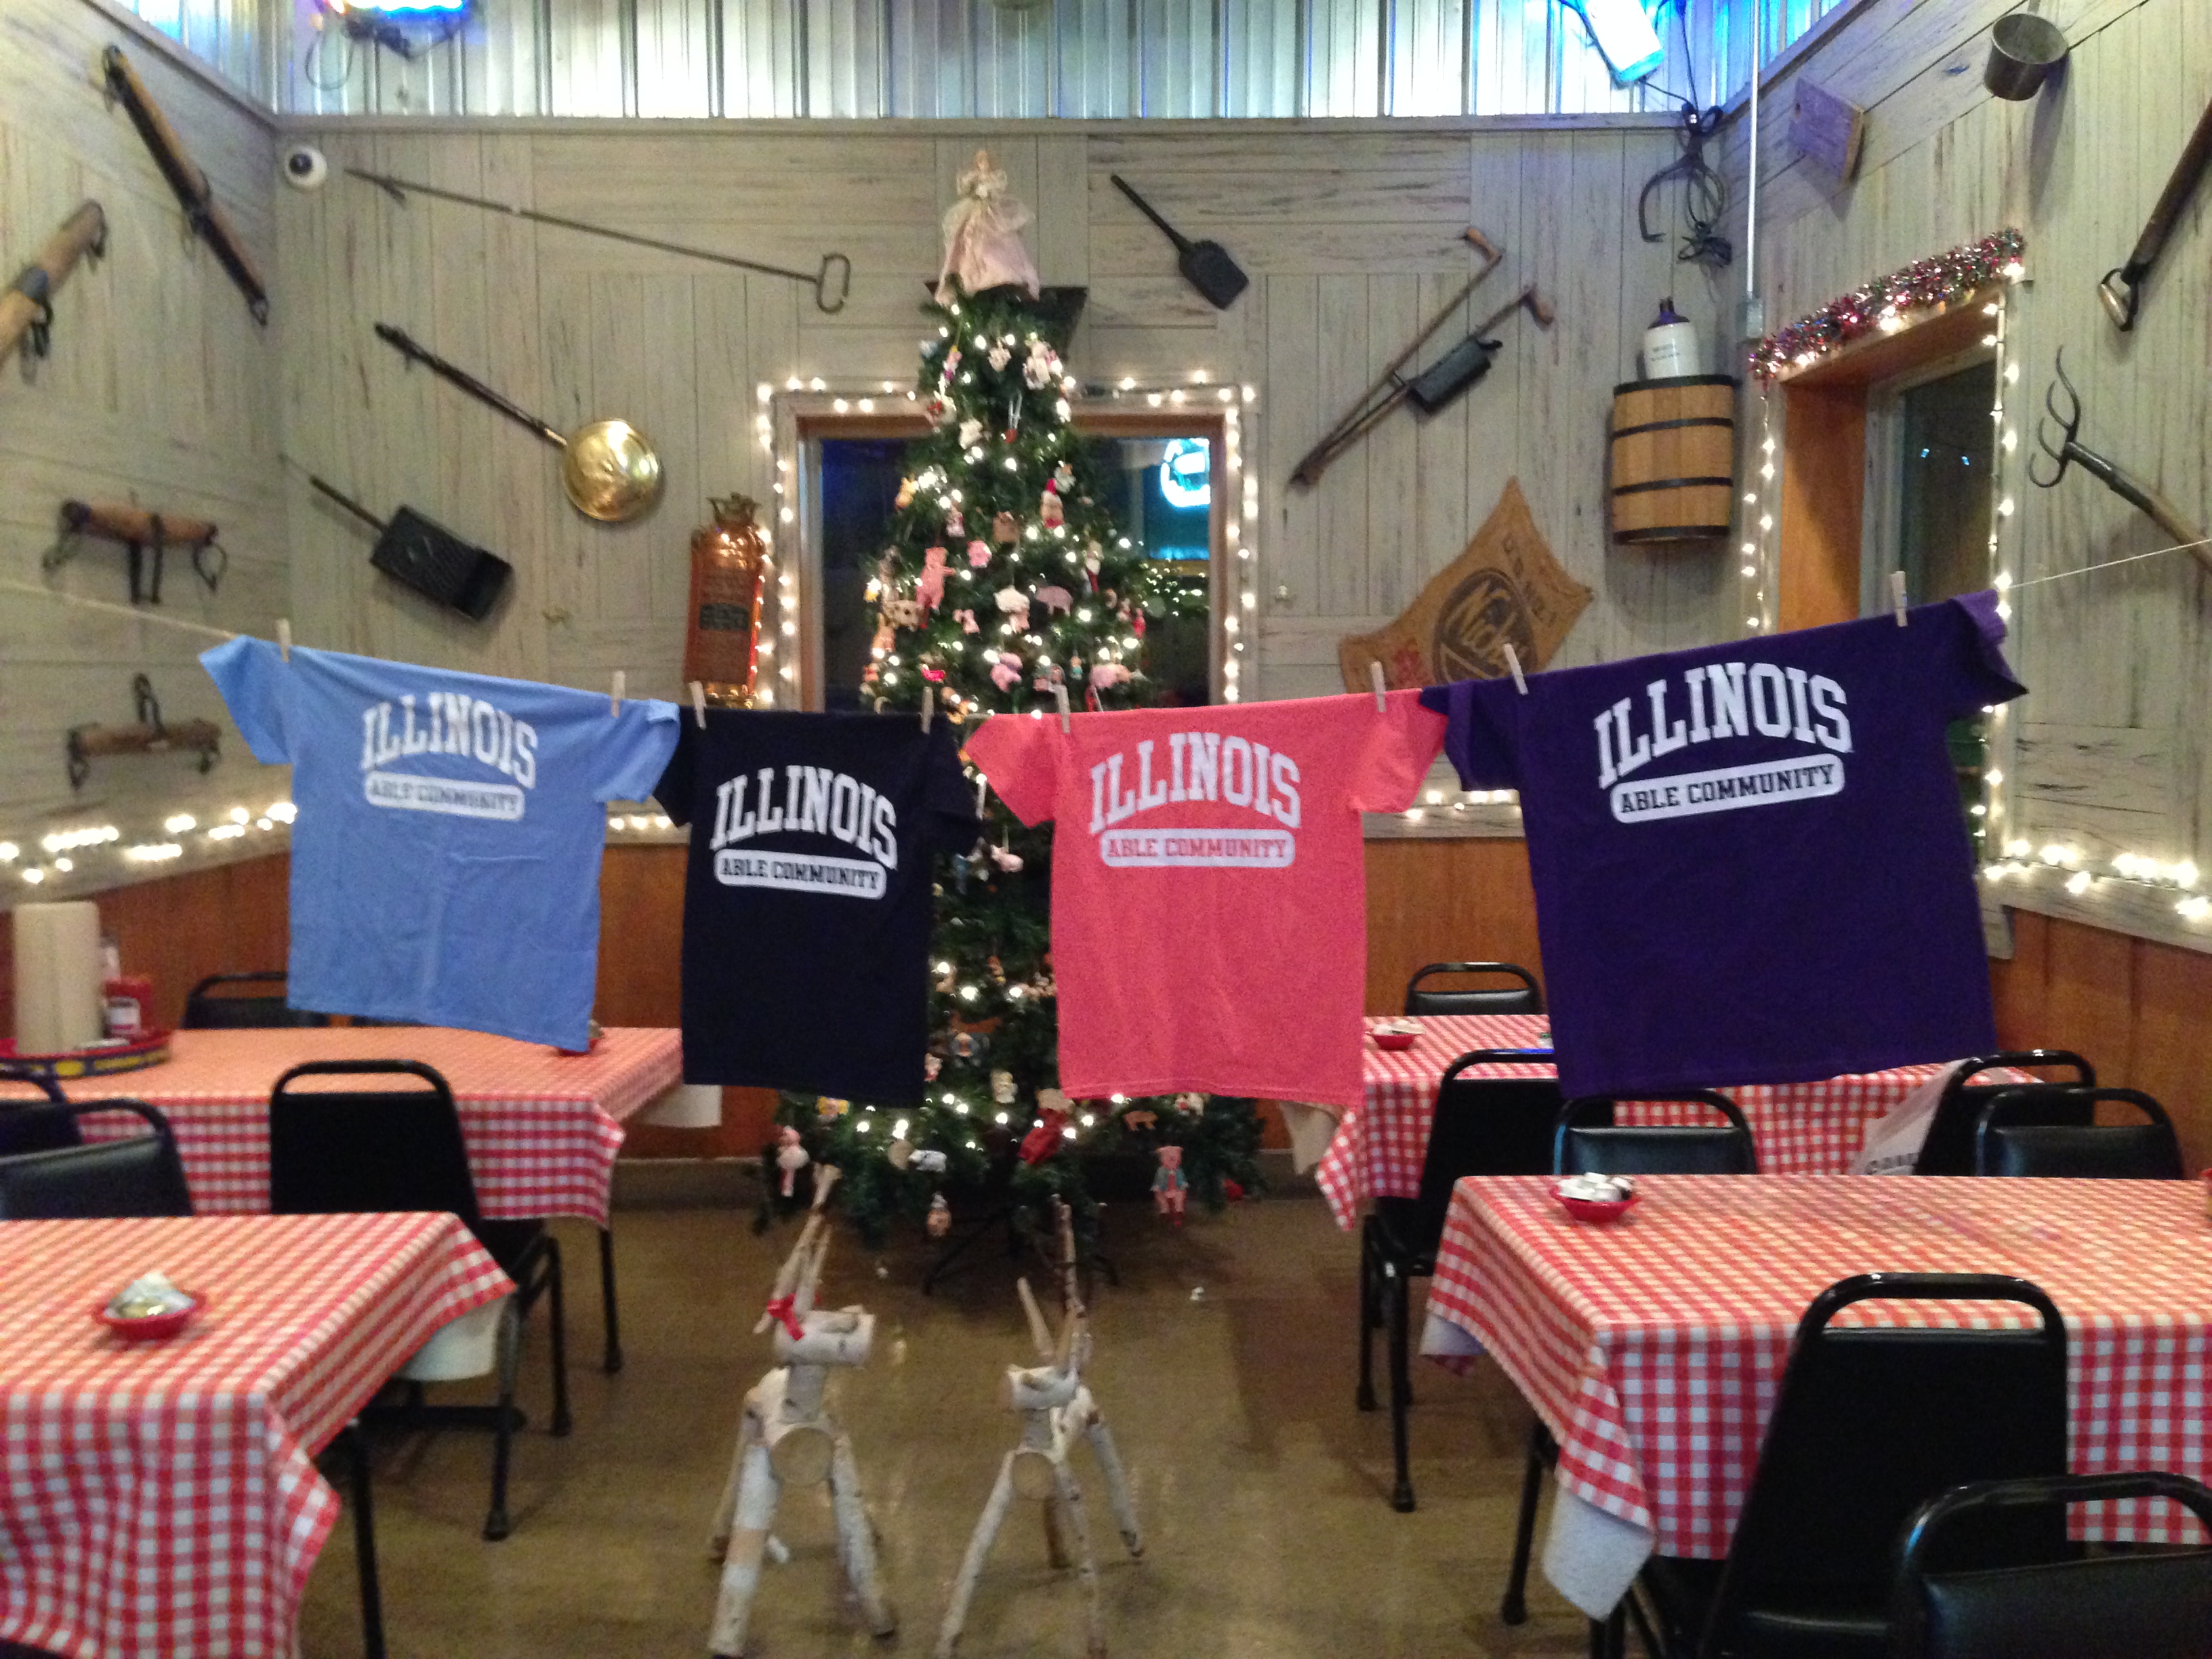 Able Community T-shirts strung in front of Uncle Bub's Christmas tree